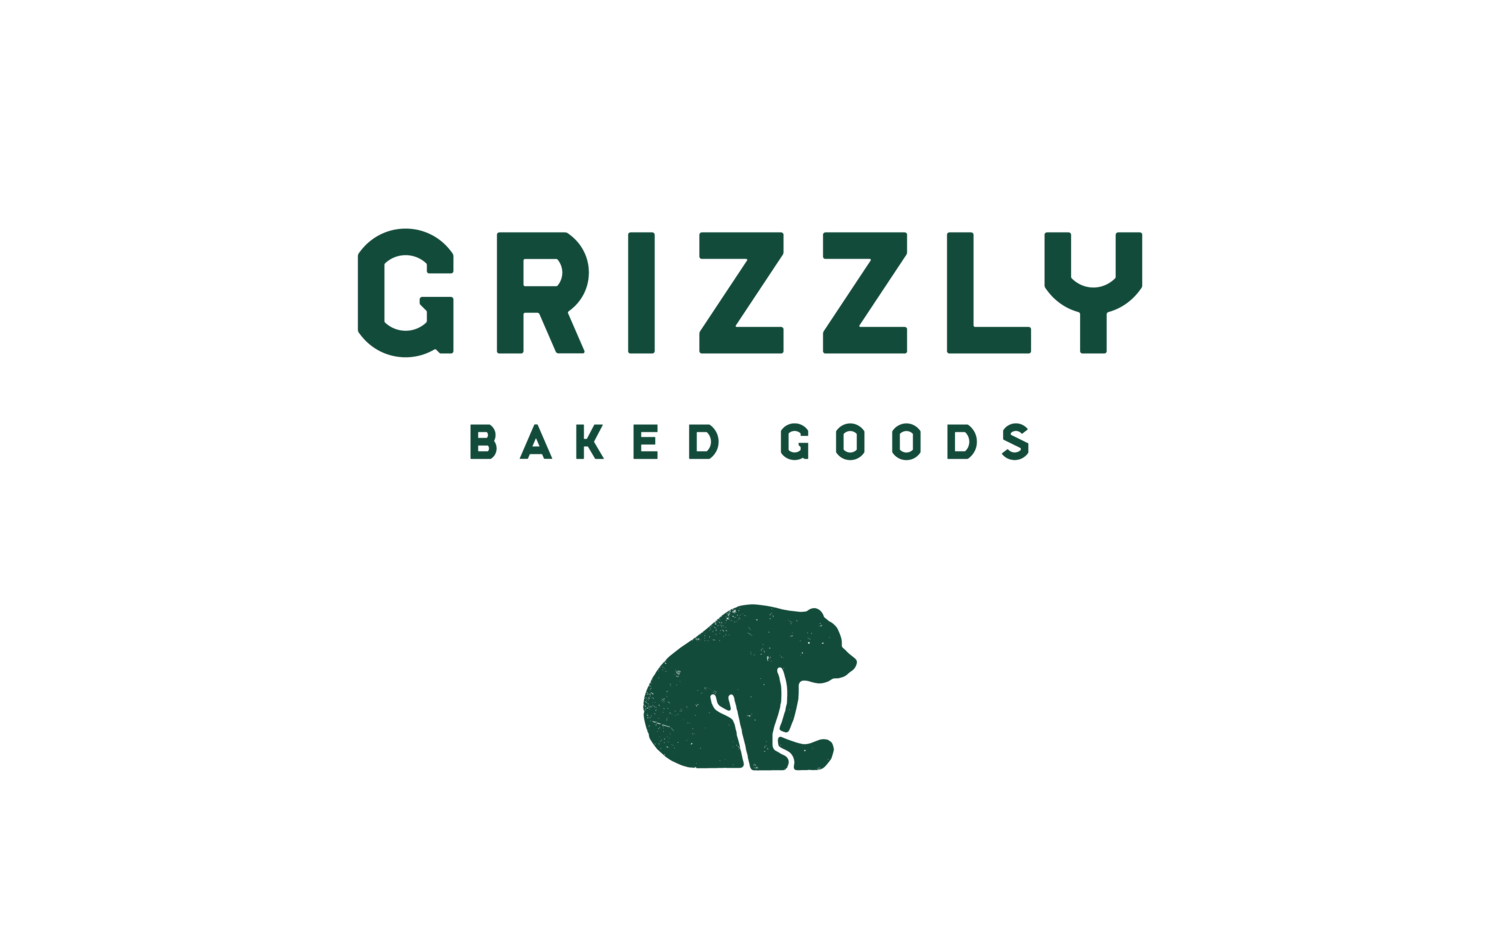 Grizzly Baked Goods